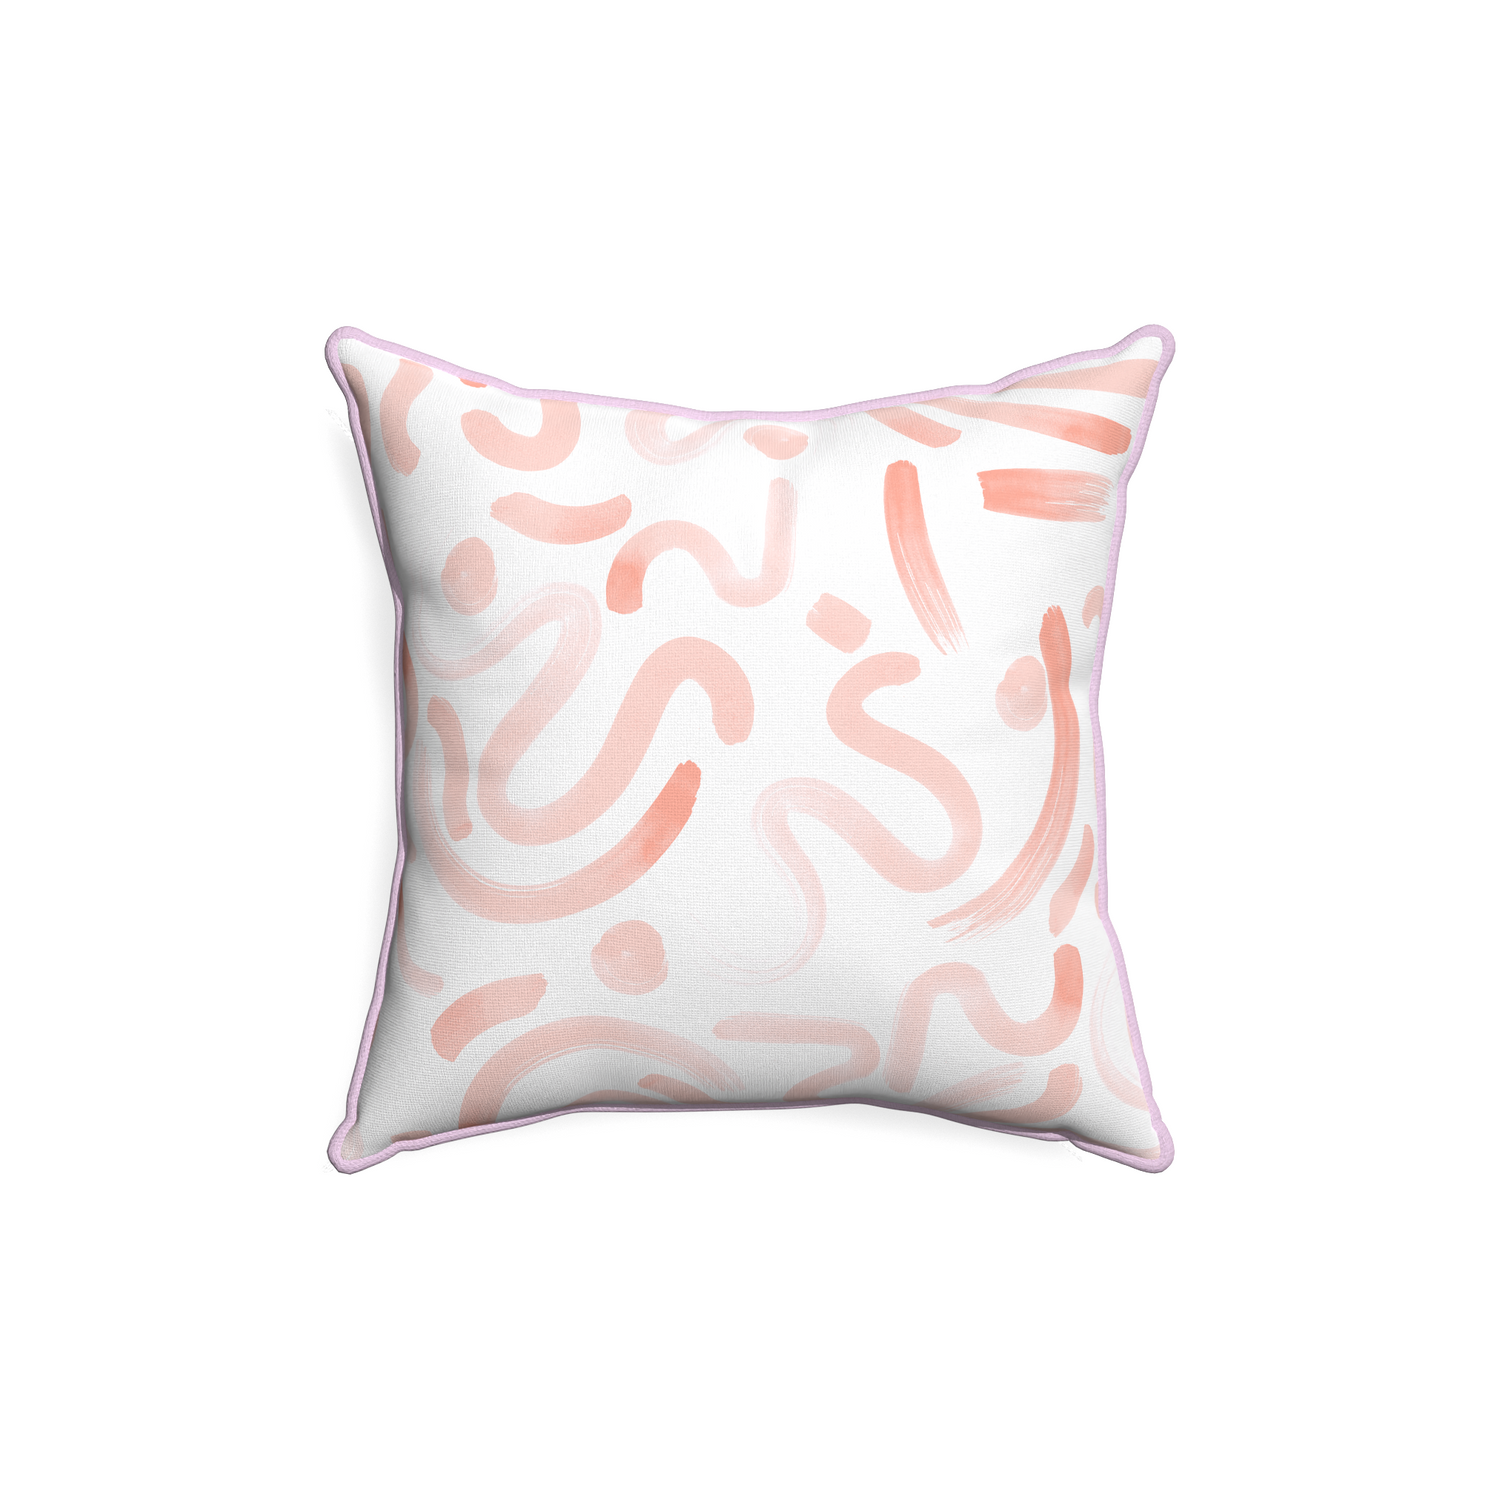 18-square hockney pink custom pillow with l piping on white background